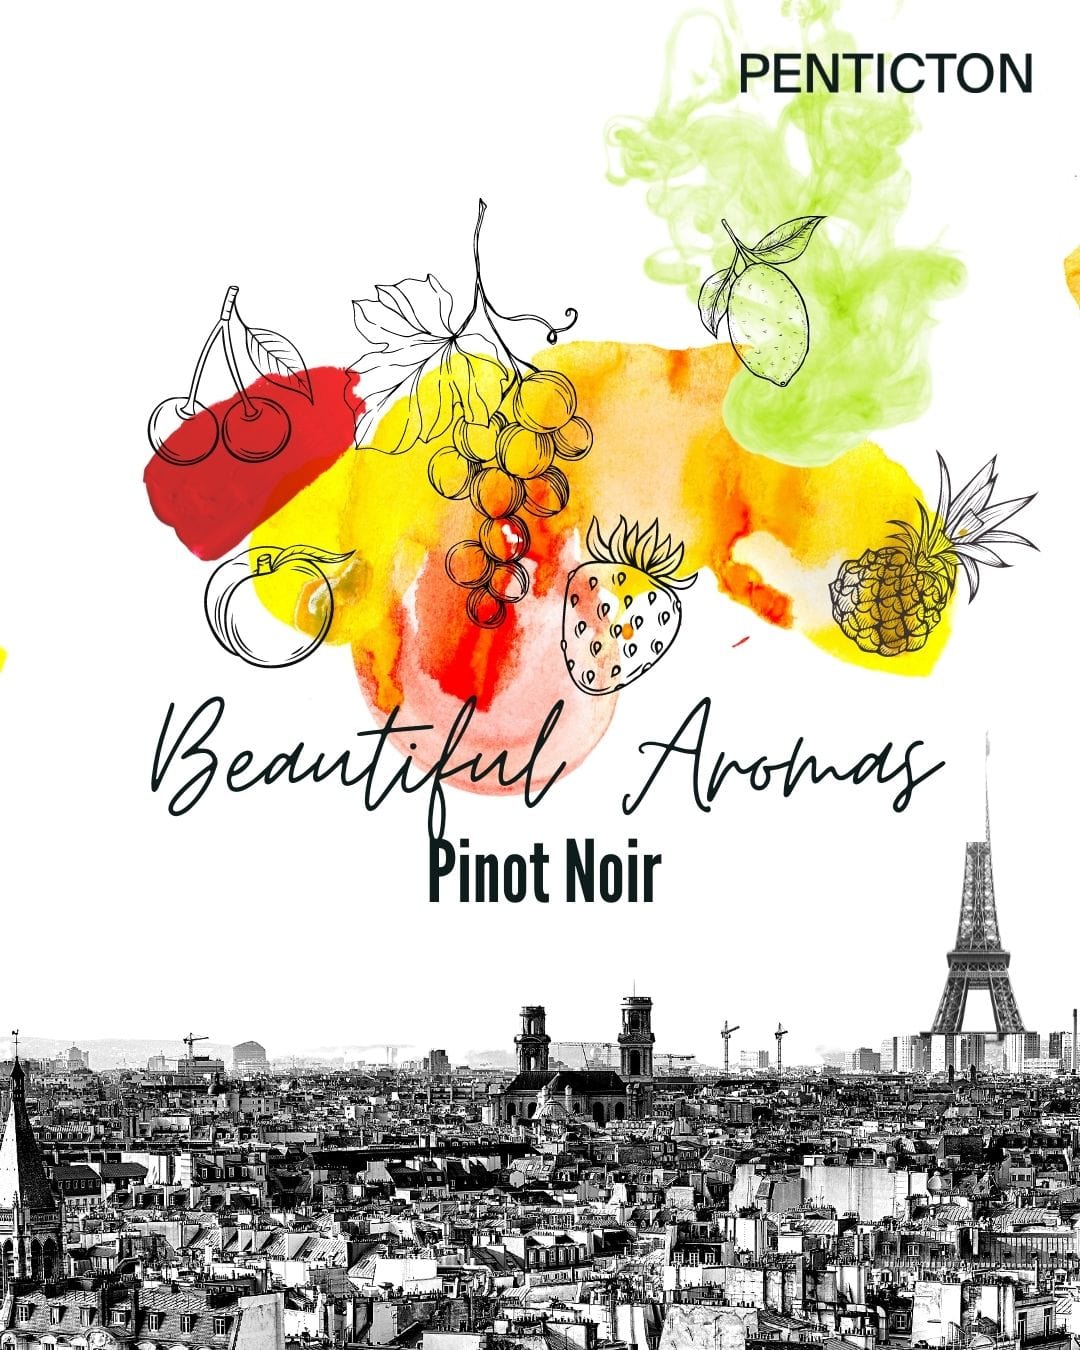 Shop PENTICTON Beautiful Aromas of Pinot Noir Tasting Workshop【絕美黑皮諾】法國品酒工作坊 online at PENTICTON artisanal French wine store in Hong Kong. Discover other French wines, promotions, workshops and featured offers at pentictonpacific.com 